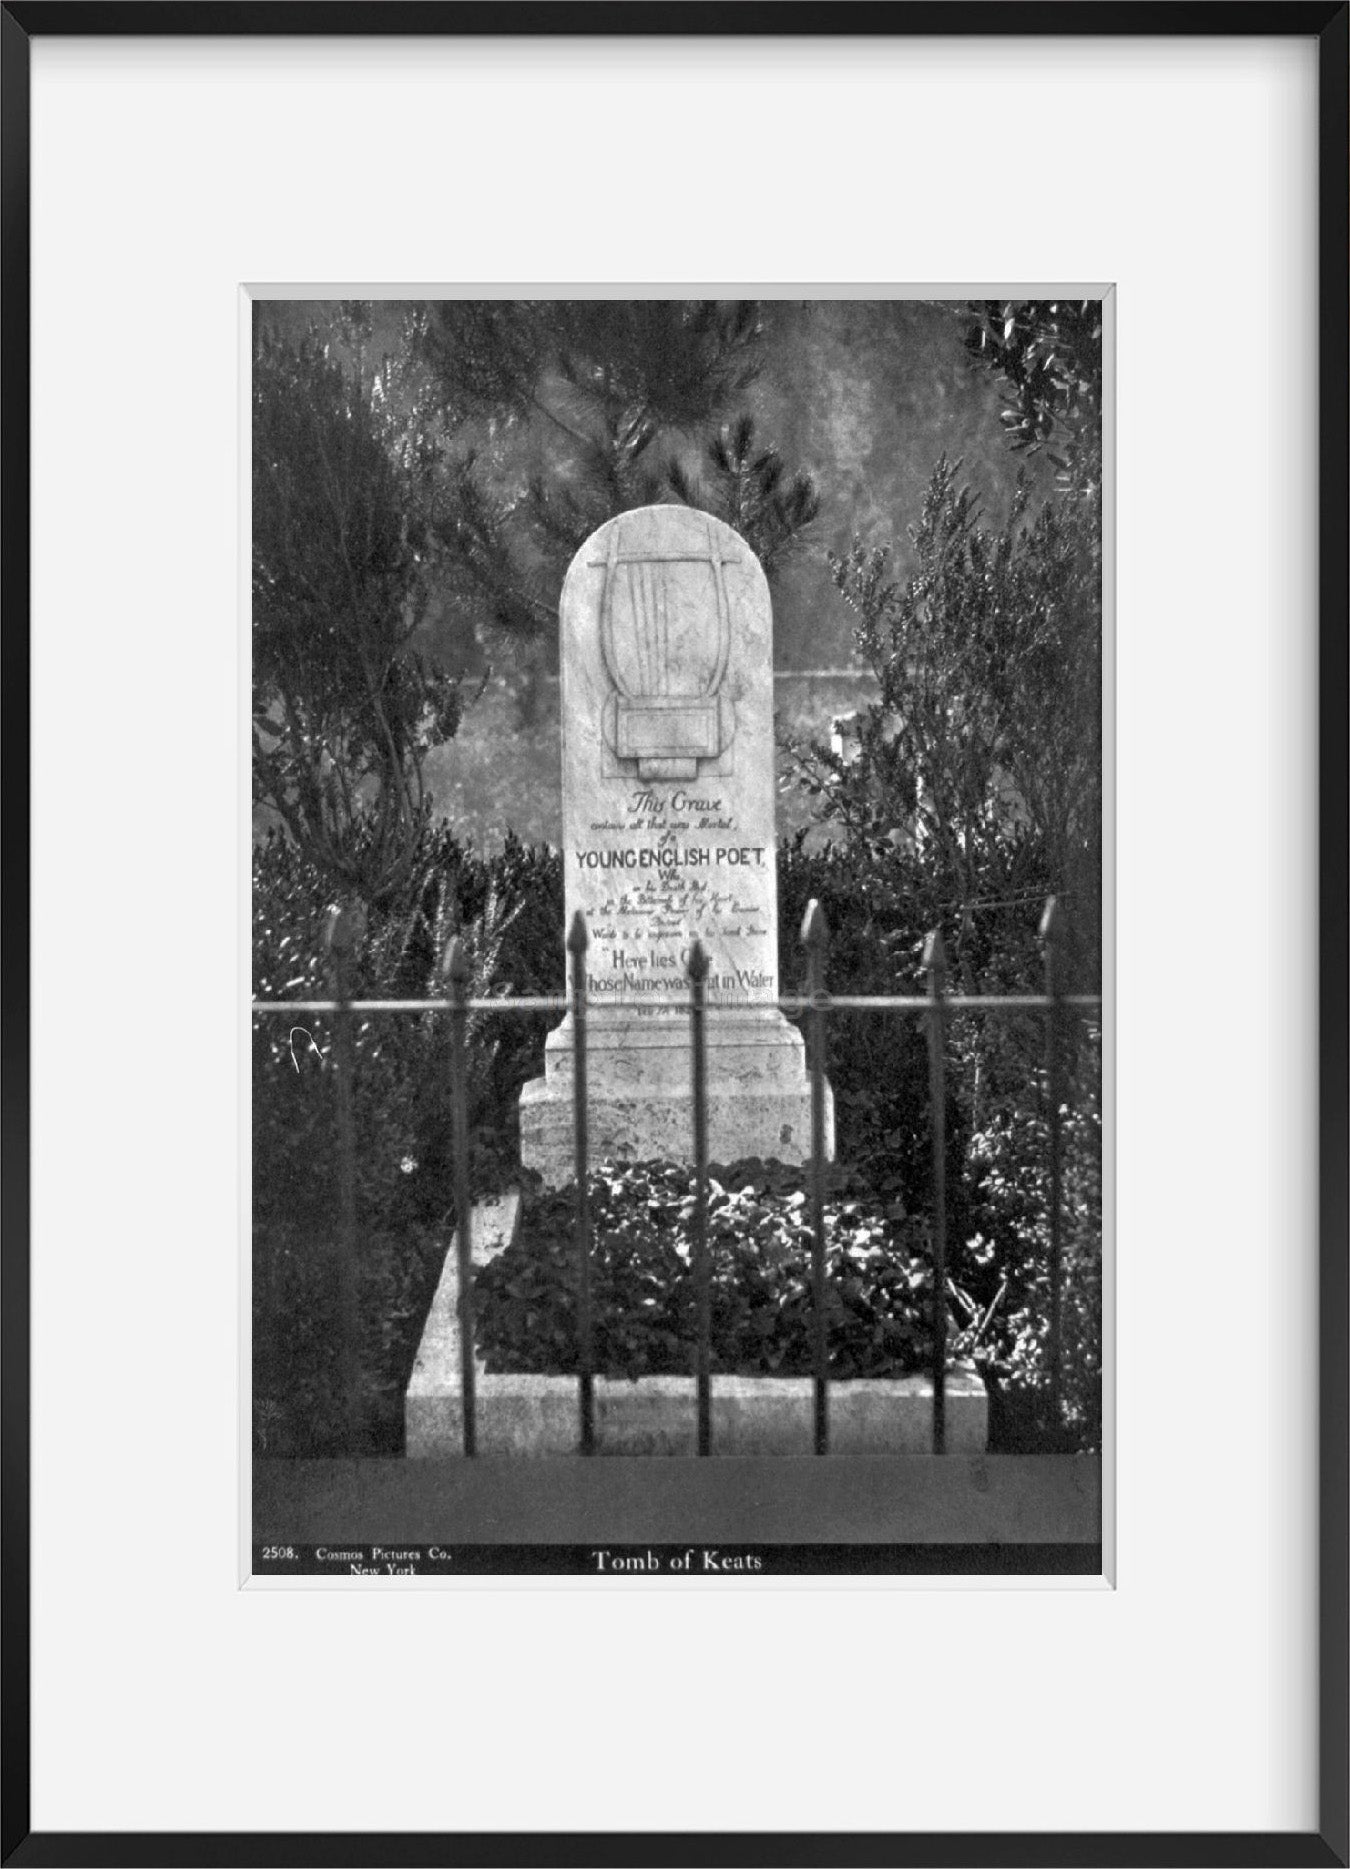 Photograph of Tomb of Keats